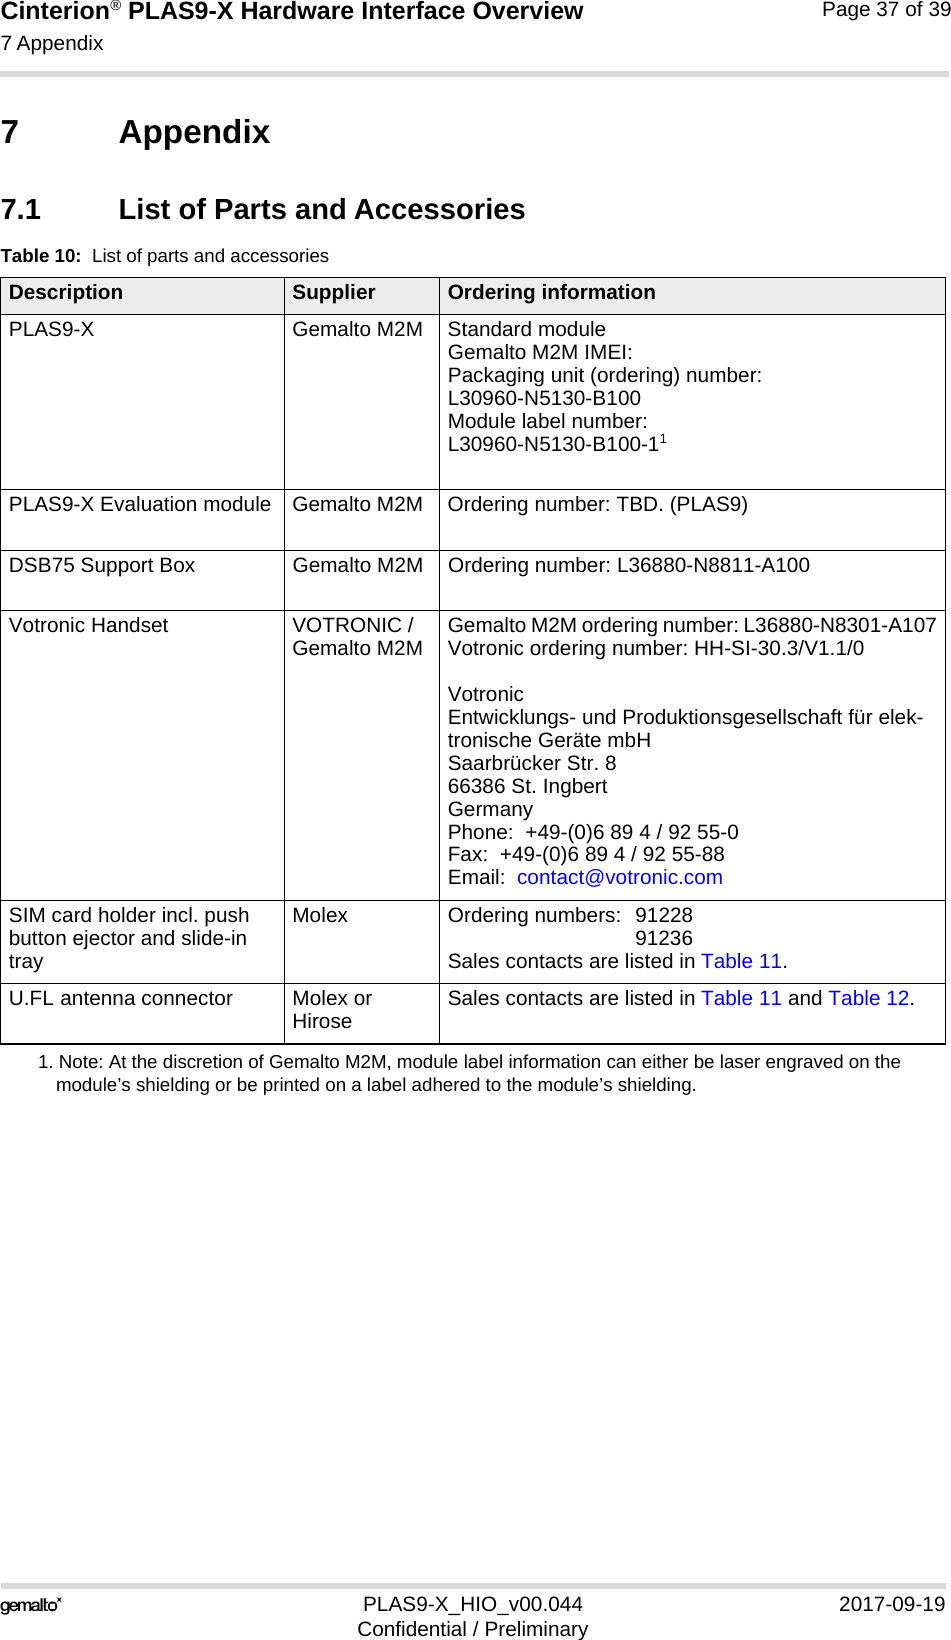 Cinterion® PLAS9-X Hardware Interface Overview7 Appendix38PLAS9-X_HIO_v00.044 2017-09-19Confidential / PreliminaryPage 37 of 397 Appendix7.1 List of Parts and AccessoriesTable 10:  List of parts and accessoriesDescription Supplier Ordering informationPLAS9-X Gemalto M2M Standard module Gemalto M2M IMEI: Packaging unit (ordering) number: L30960-N5130-B100Module label number:L30960-N5130-B100-111. Note: At the discretion of Gemalto M2M, module label information can either be laser engraved on the module’s shielding or be printed on a label adhered to the module’s shielding.PLAS9-X Evaluation module Gemalto M2M Ordering number: TBD. (PLAS9)DSB75 Support Box Gemalto M2M Ordering number: L36880-N8811-A100Votronic Handset VOTRONIC / Gemalto M2M Gemalto M2M ordering number: L36880-N8301-A107Votronic ordering number: HH-SI-30.3/V1.1/0Votronic Entwicklungs- und Produktionsgesellschaft für elek-tronische Geräte mbHSaarbrücker Str. 866386 St. IngbertGermanyPhone:  +49-(0)6 89 4 / 92 55-0Fax:  +49-(0)6 89 4 / 92 55-88Email:  contact@votronic.comSIM card holder incl. push button ejector and slide-in trayMolex Ordering numbers:  91228 91236Sales contacts are listed in Table 11.U.FL antenna connector Molex or Hirose Sales contacts are listed in Table 11 and Table 12.